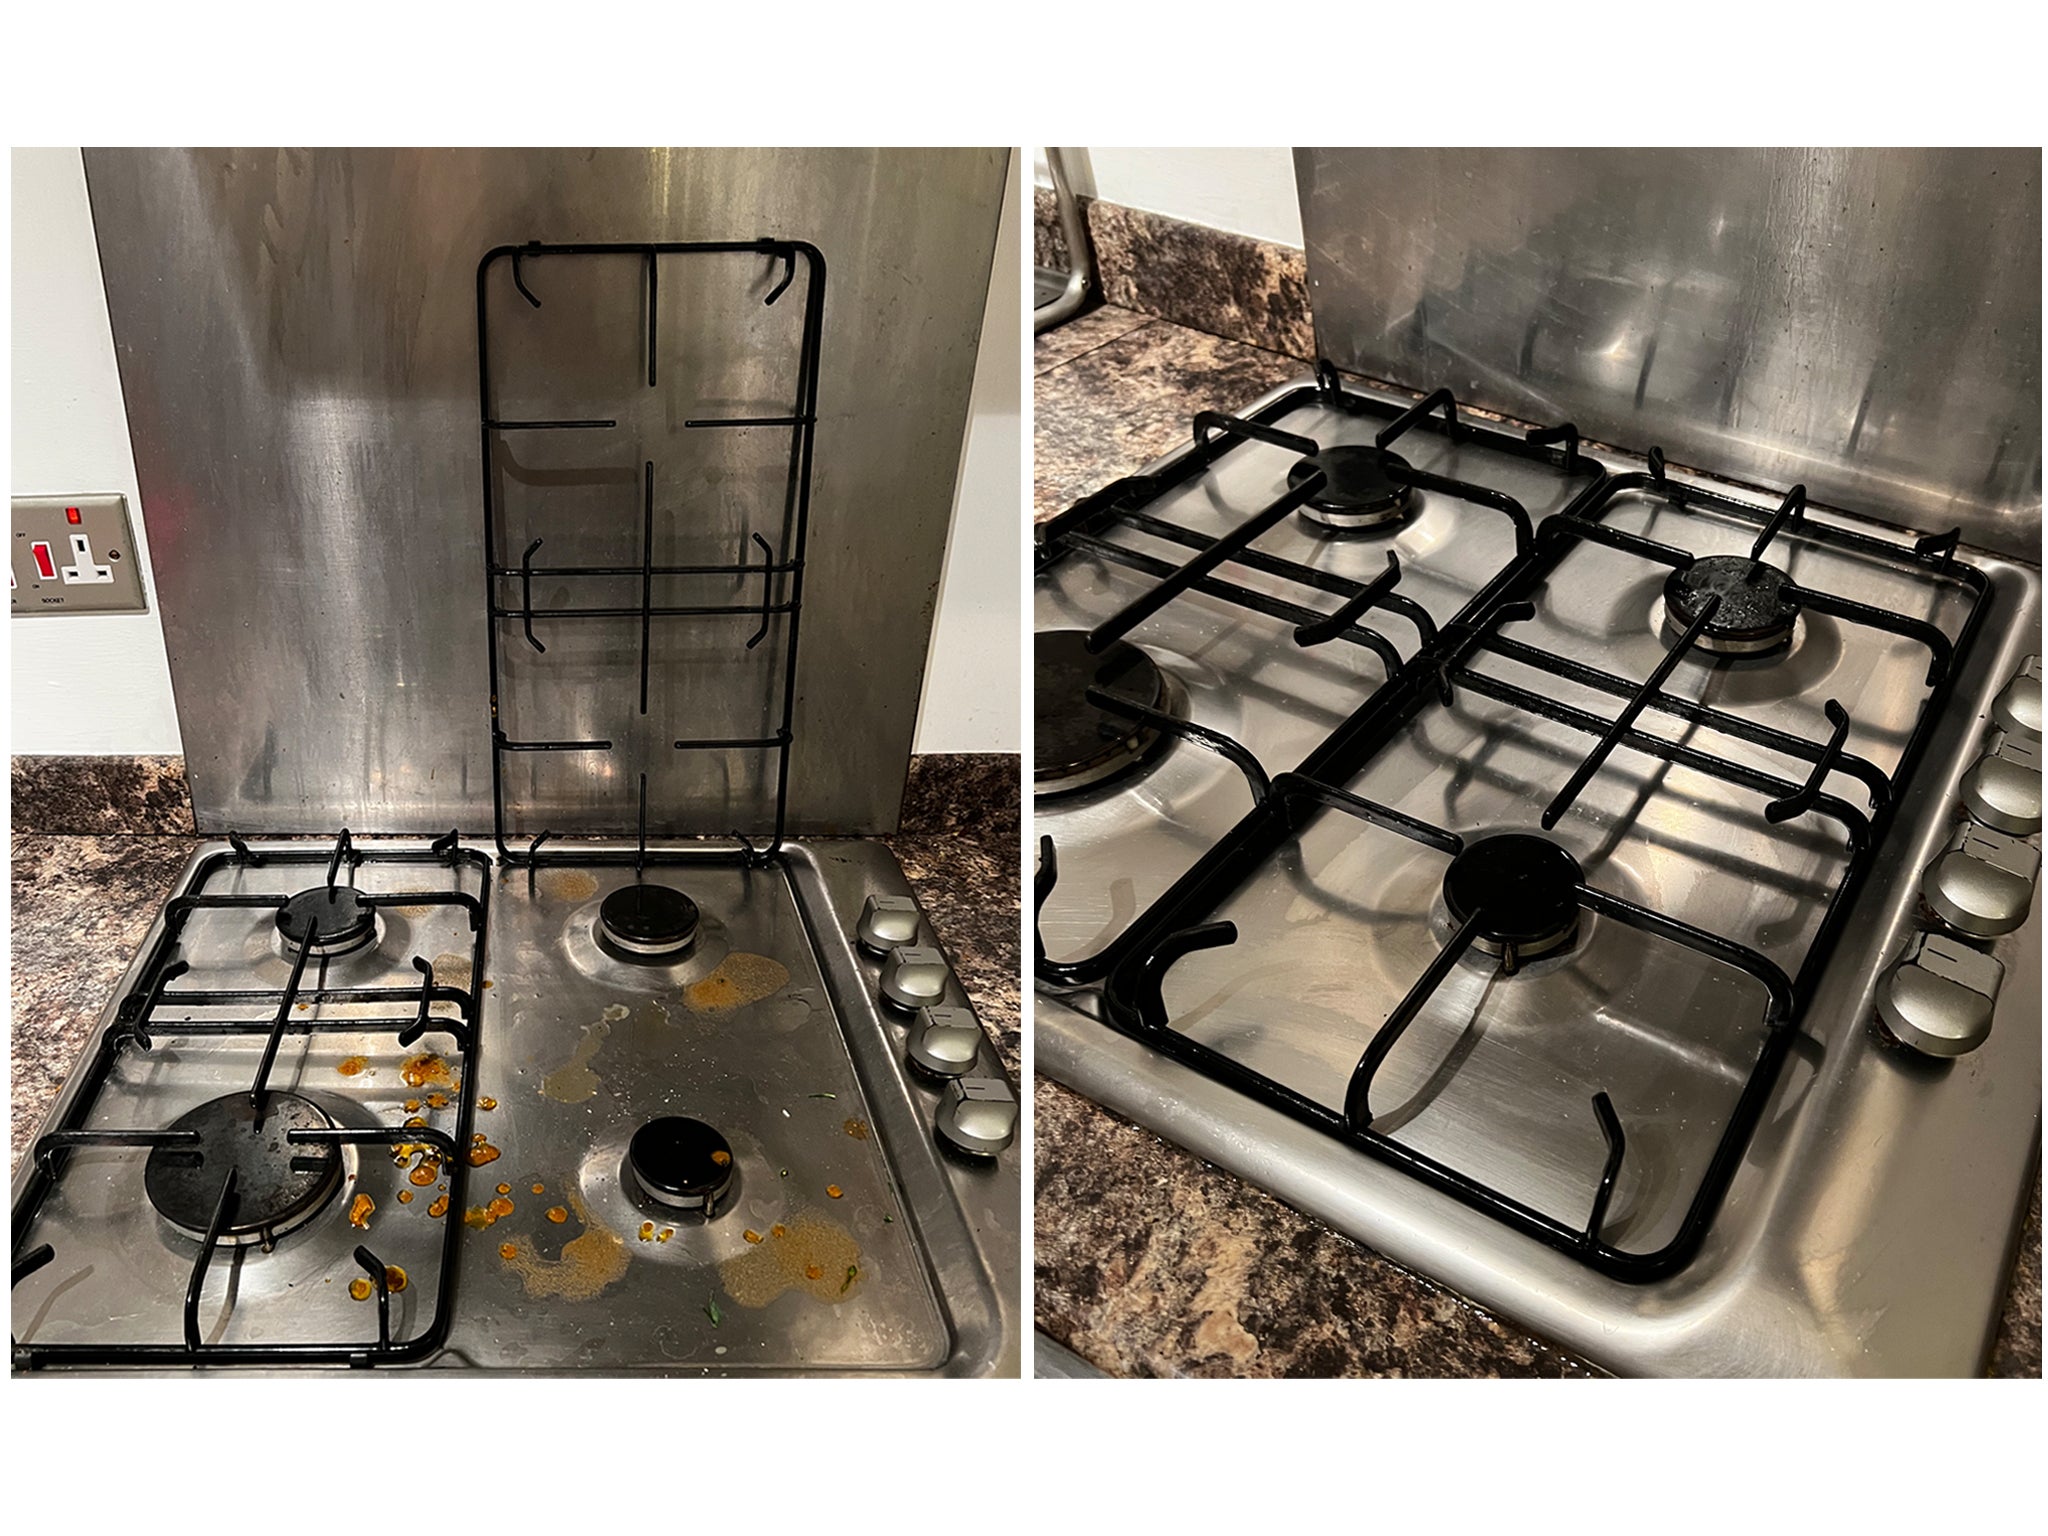 The general-purpose spray worked wonders on our dirty hob